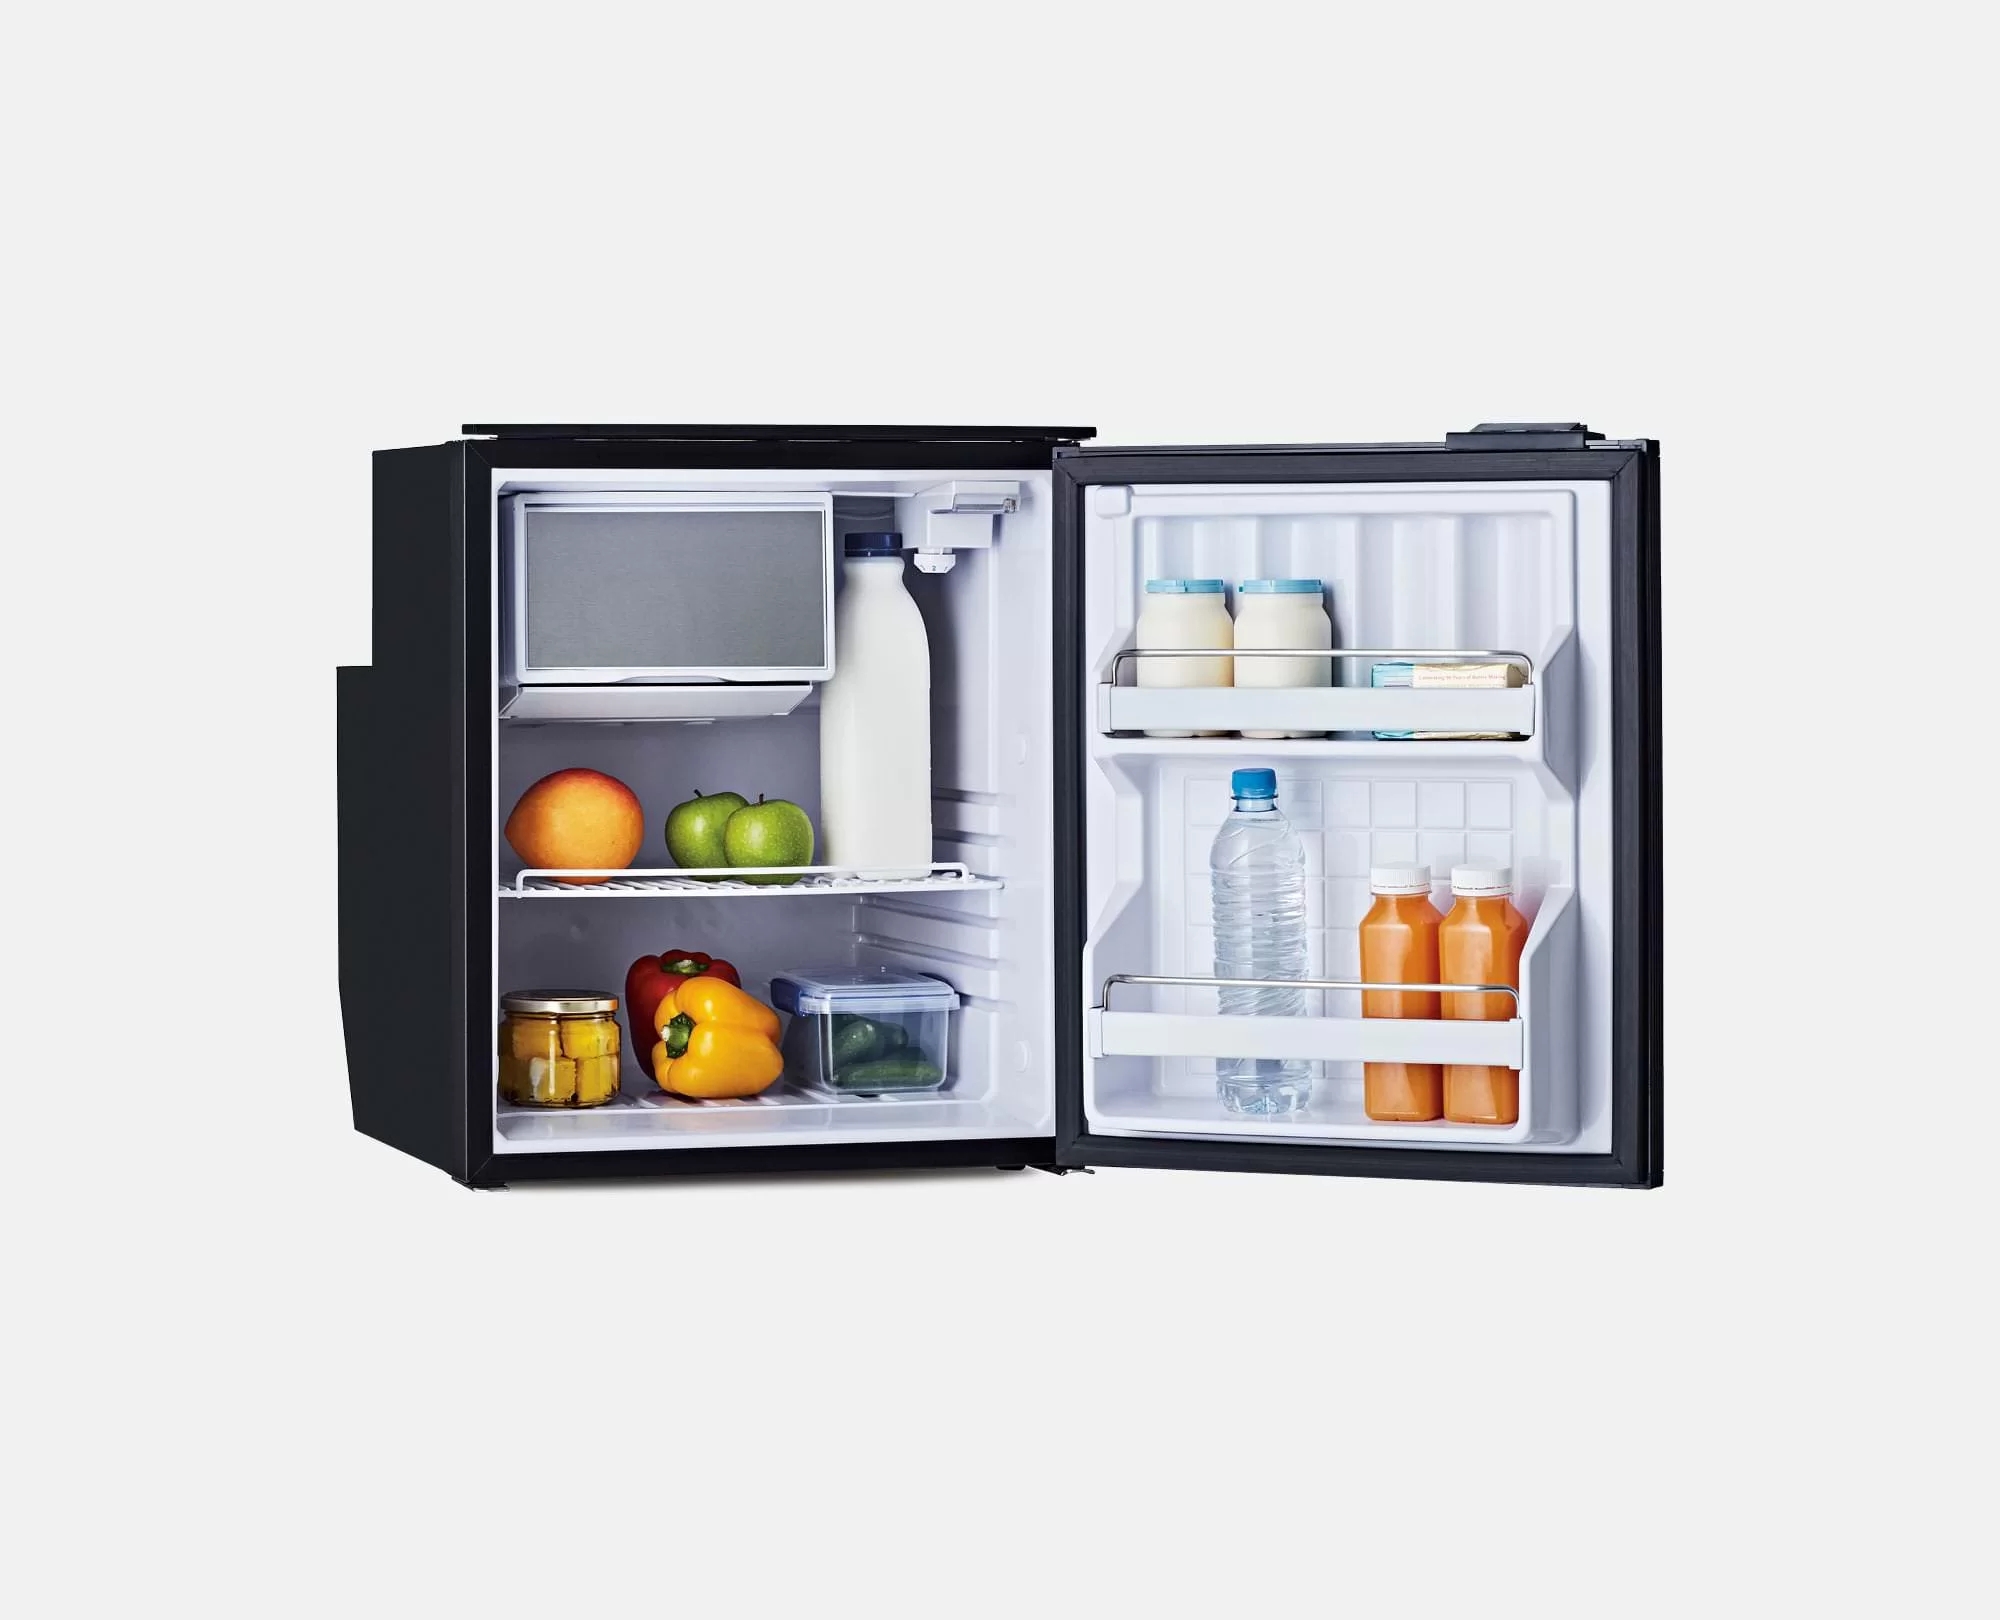 All You Need to Know About 12v Refrigerator